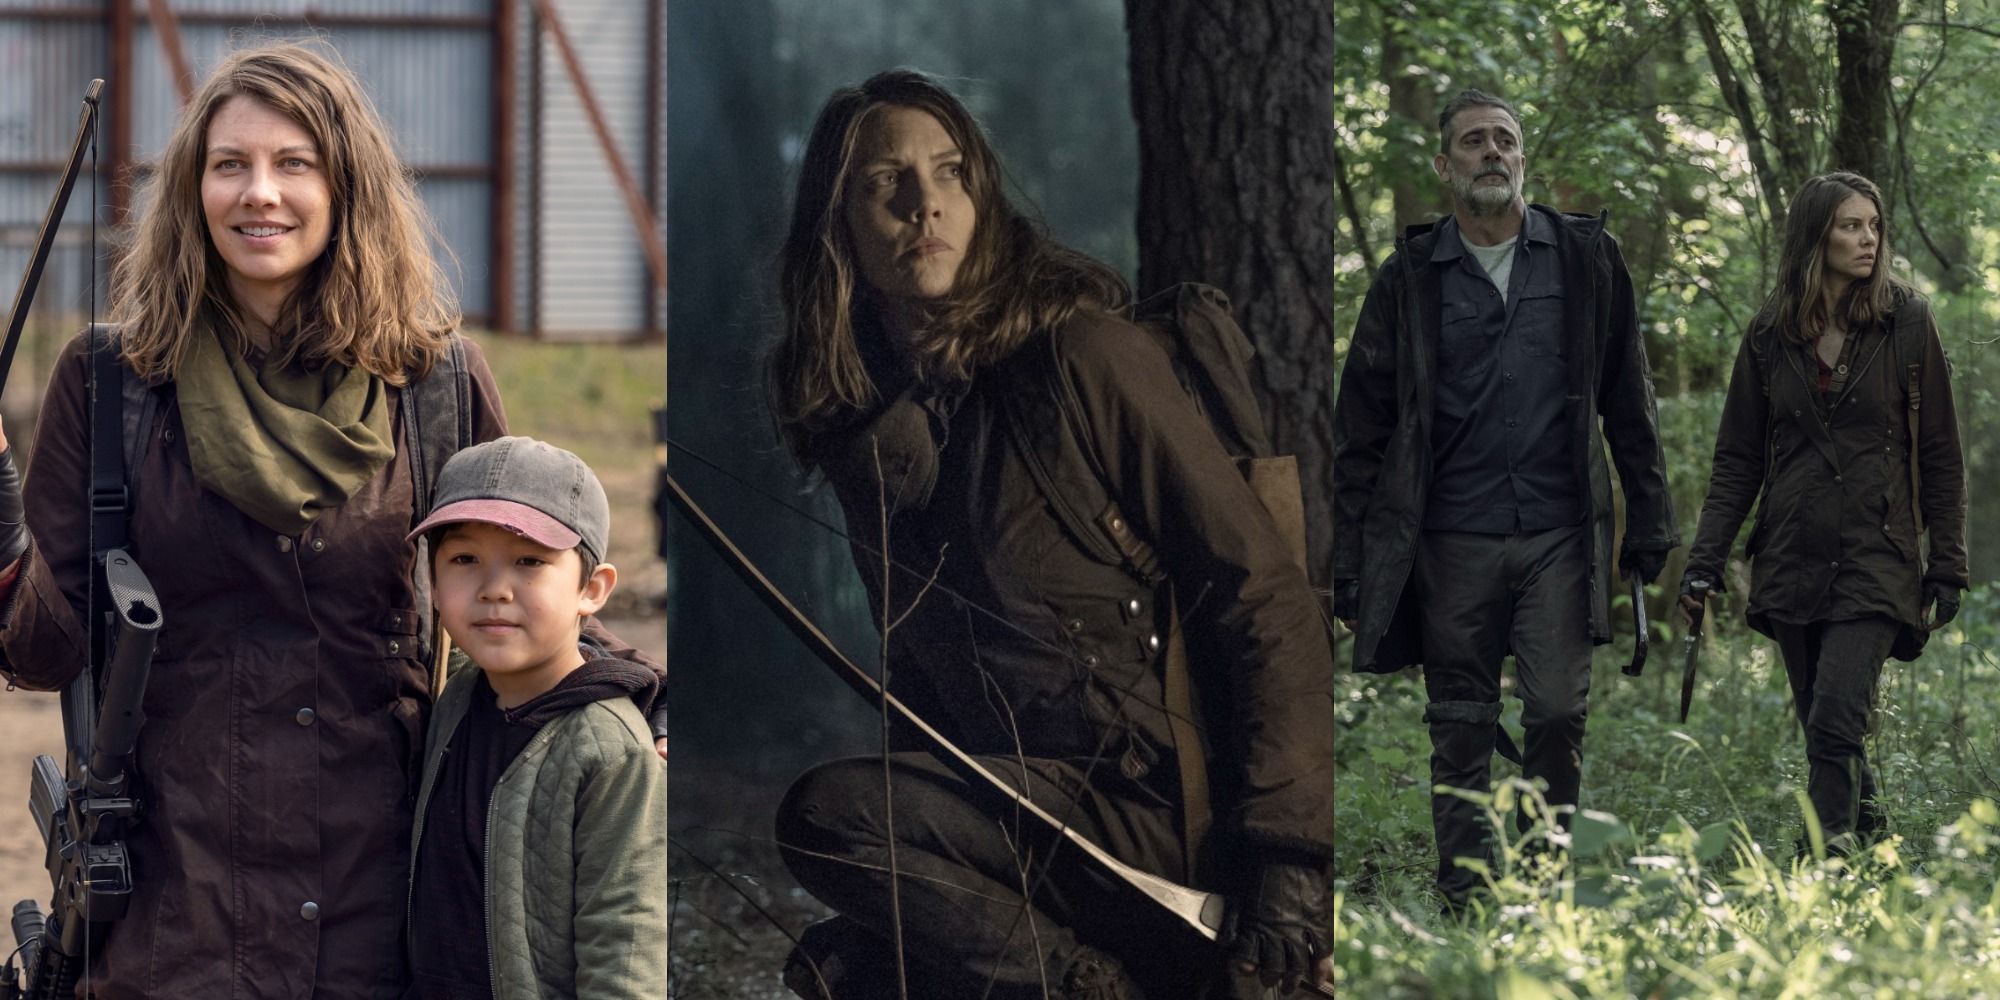 Three side by side images of Maggie with Hershel, Maggie alone, and Maggie with Negan in The Walking Dead